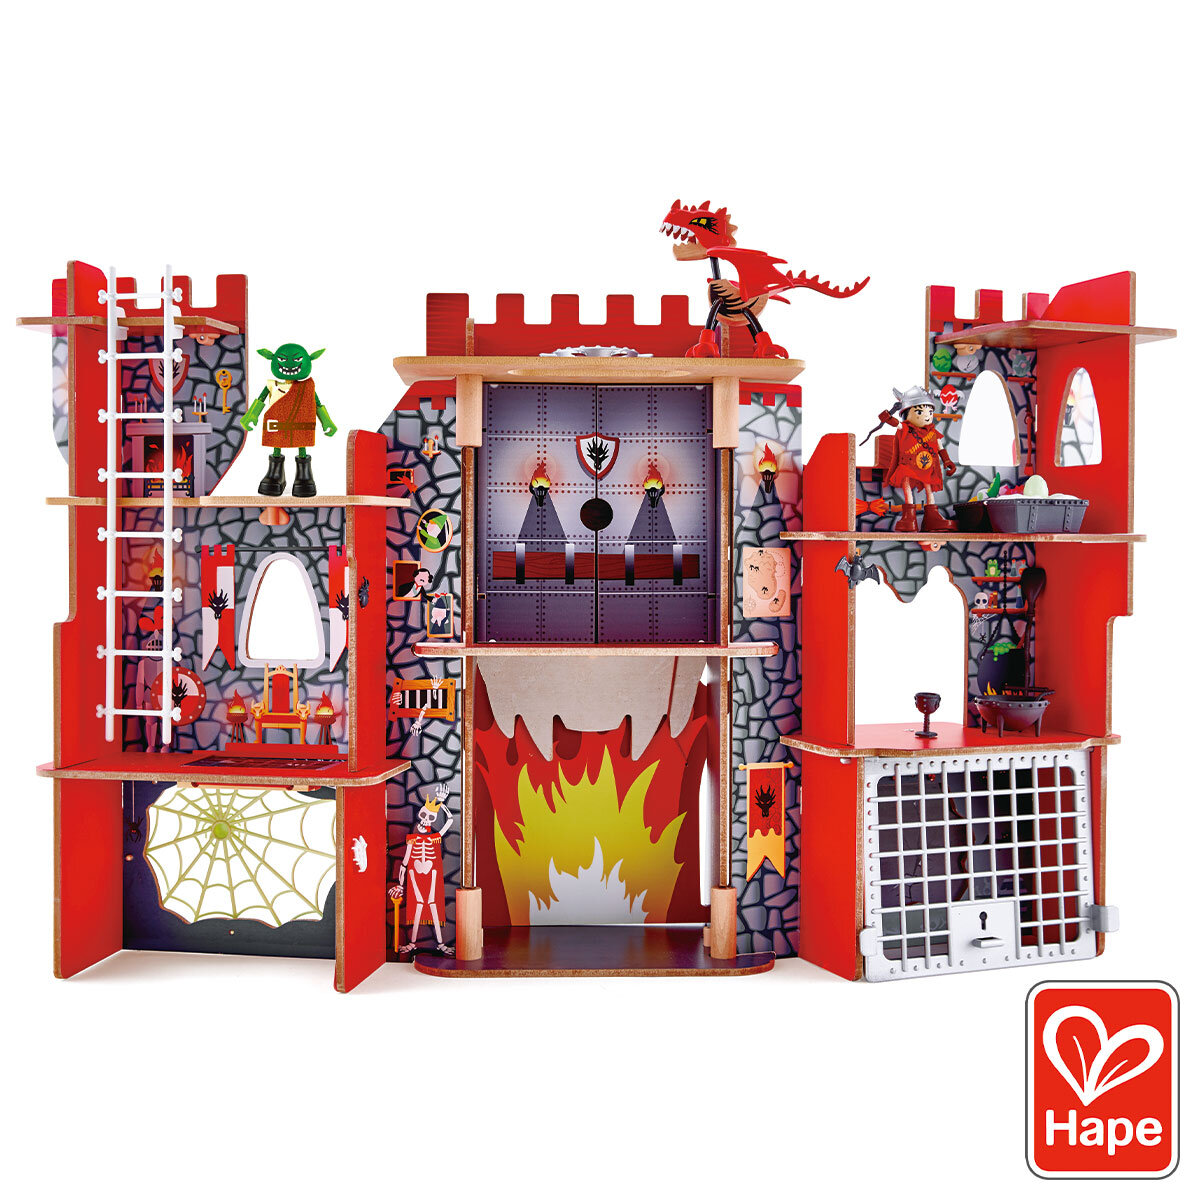 Buy Hape Viking Castle Overview Image at Costco.co.uk